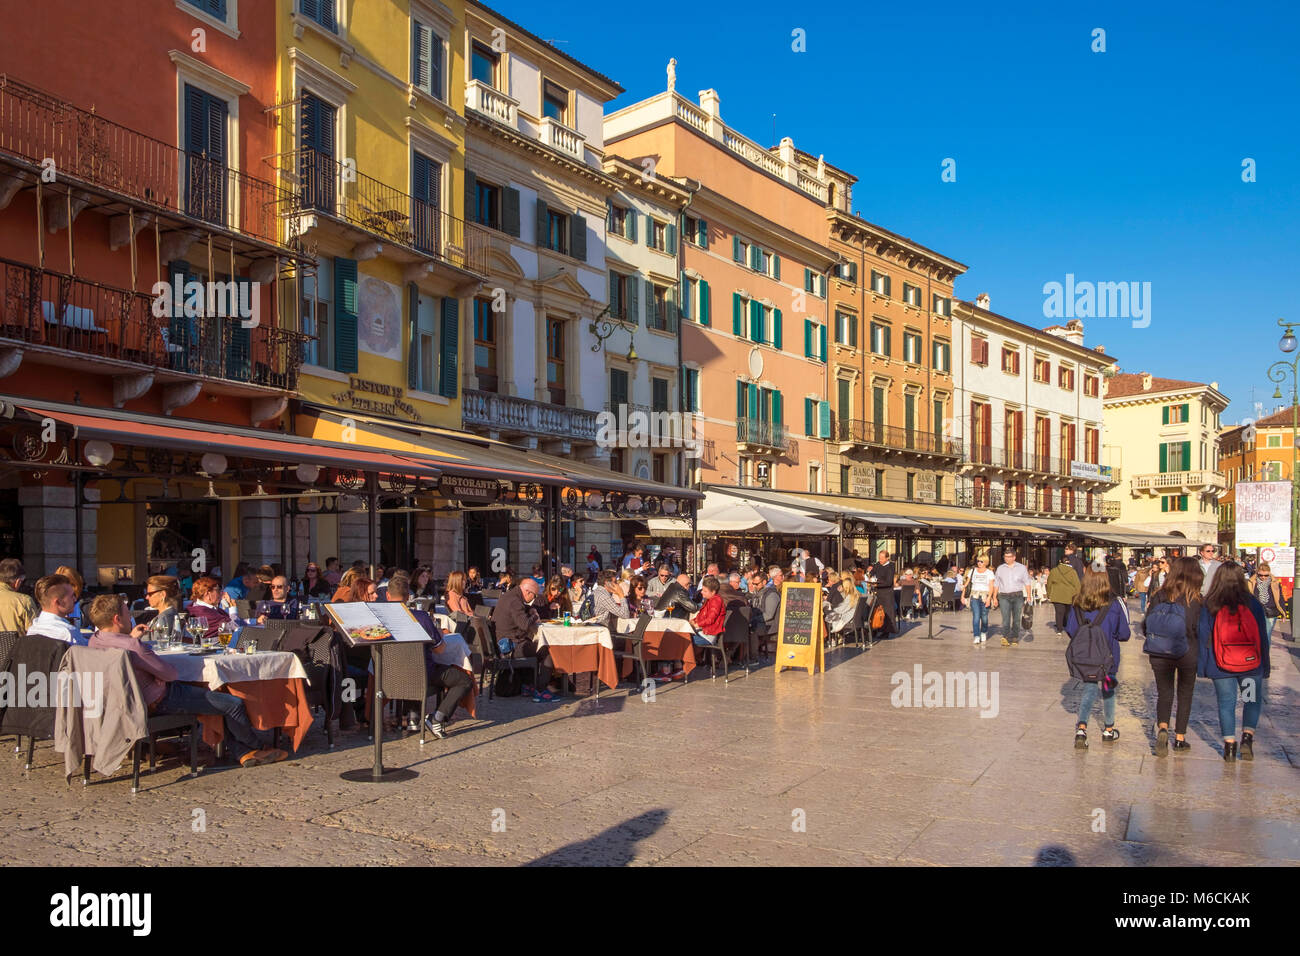 Restaurants and cafes crowded with people in Piazza Bra, Verona, Italy Stock Photo